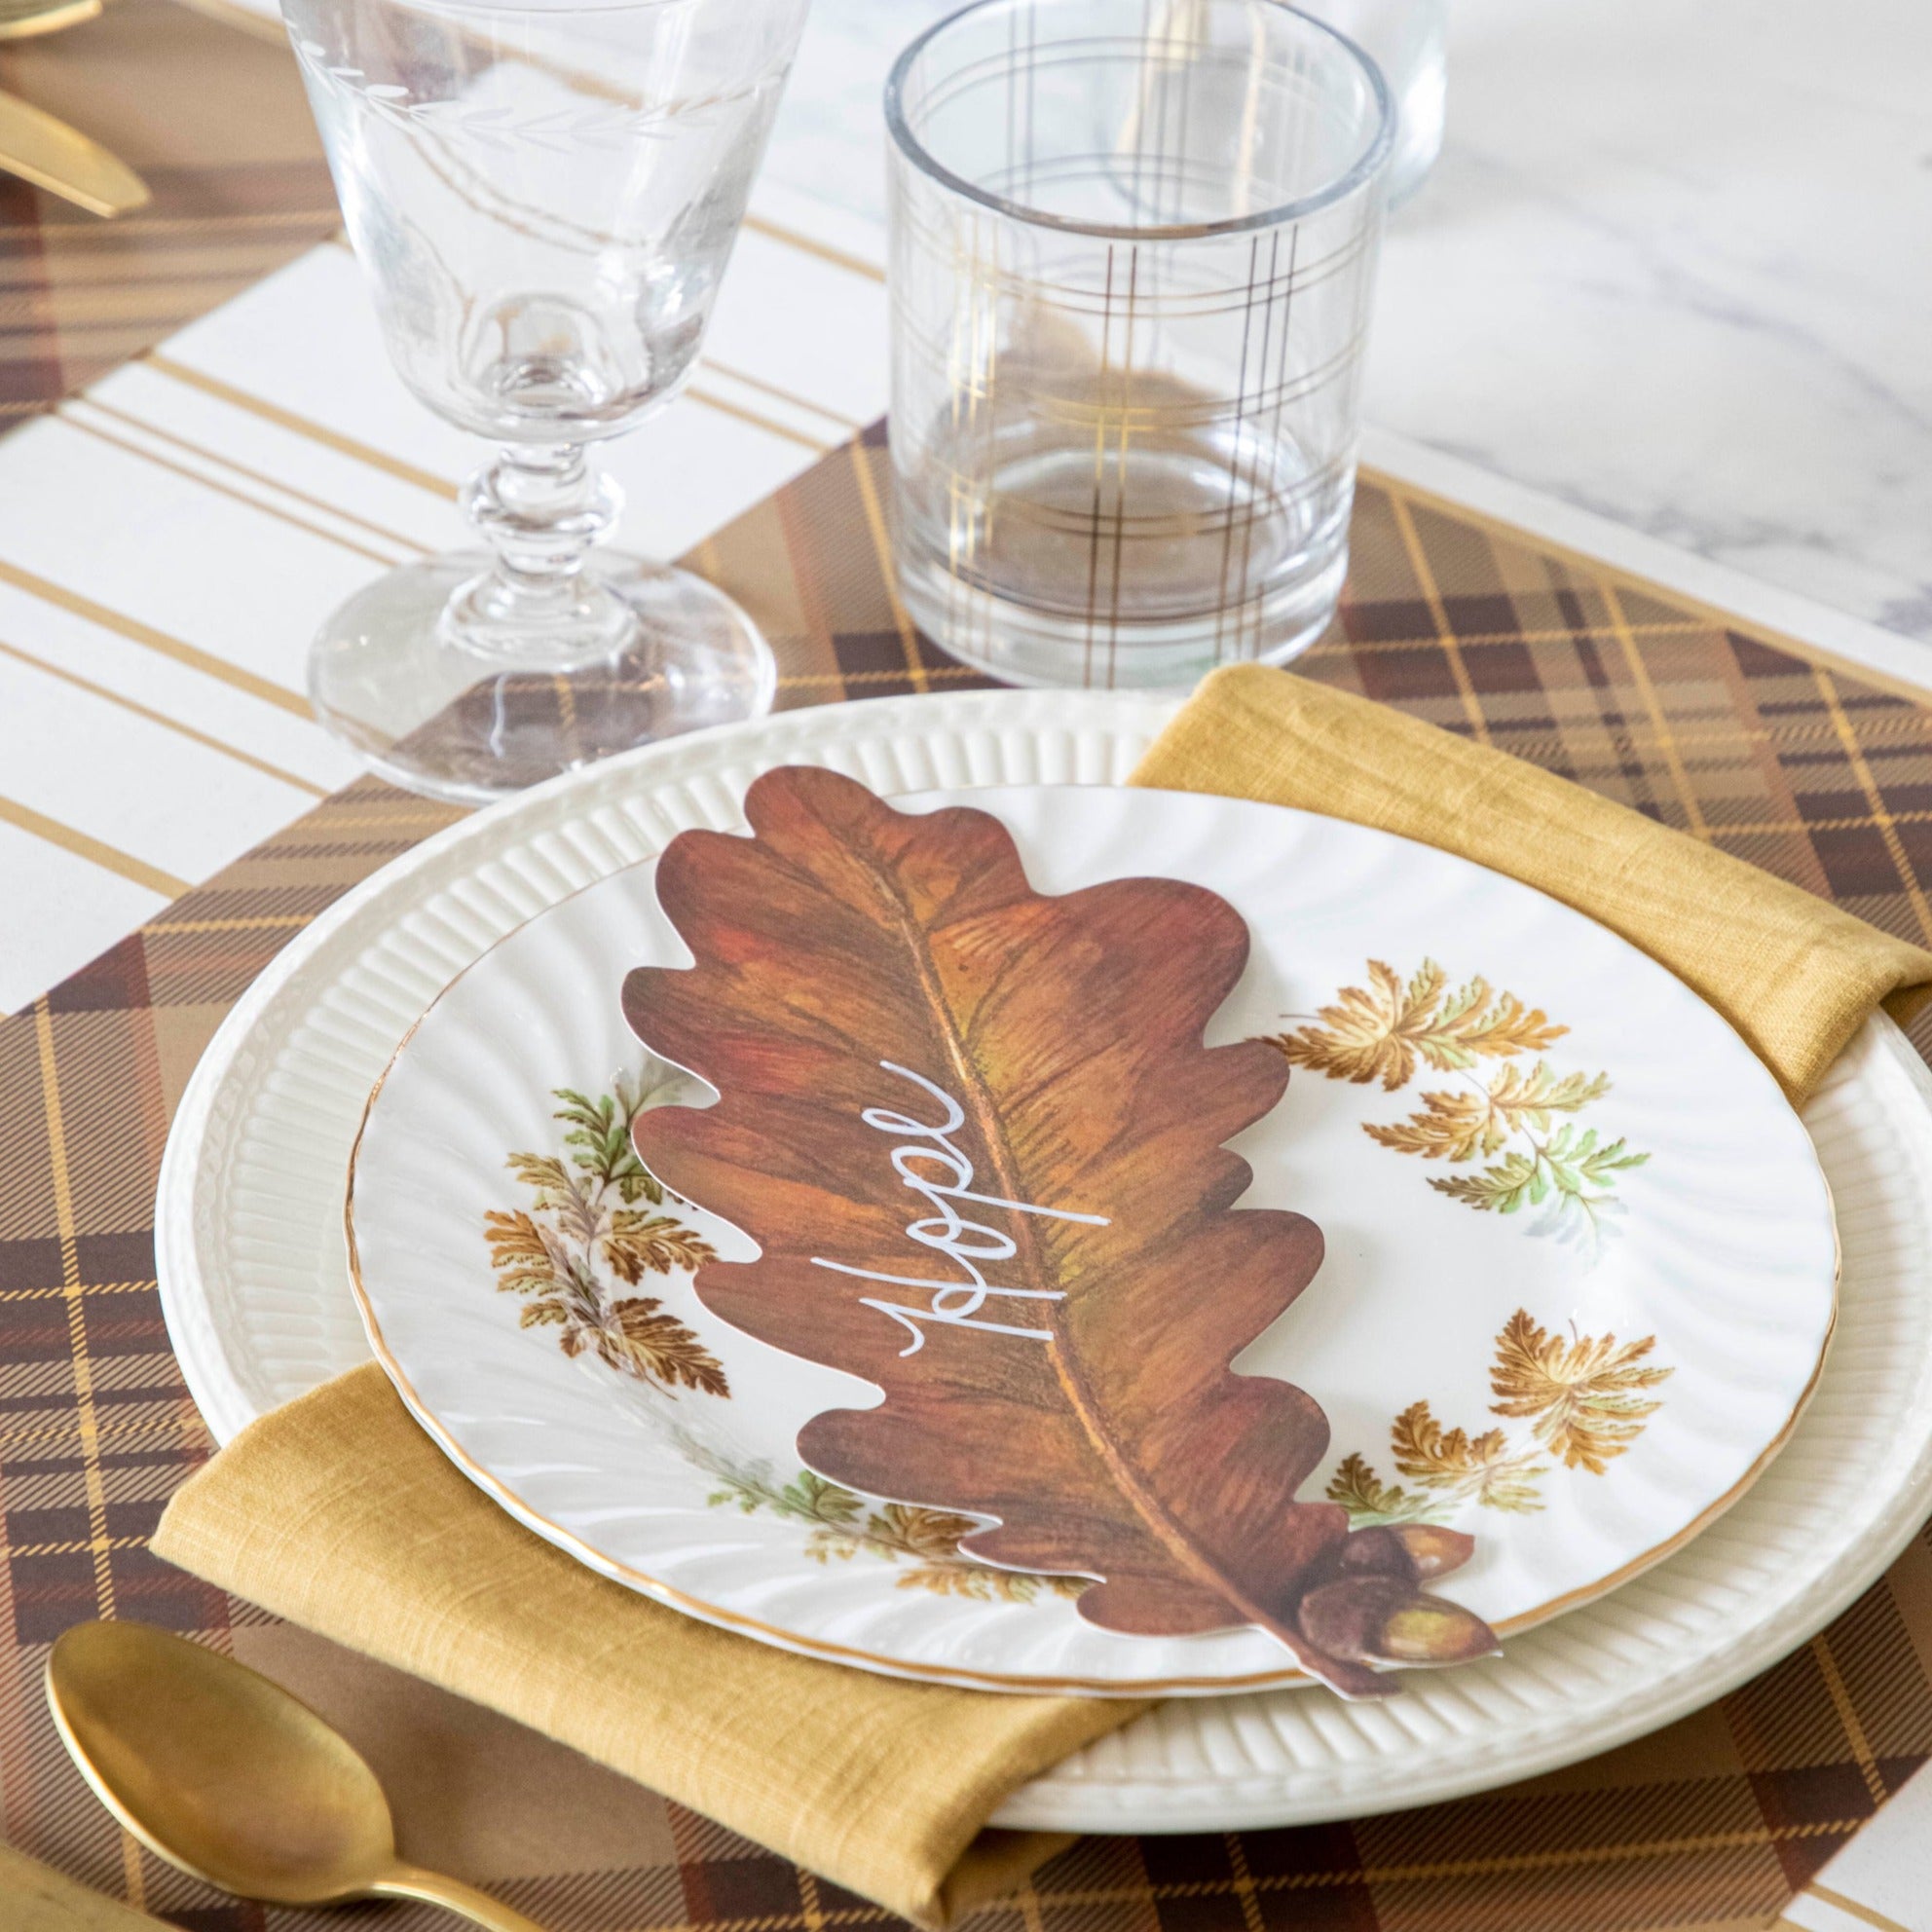 An Autumn Plaid Placemat in a place setting, with a Leaf Table Accent.